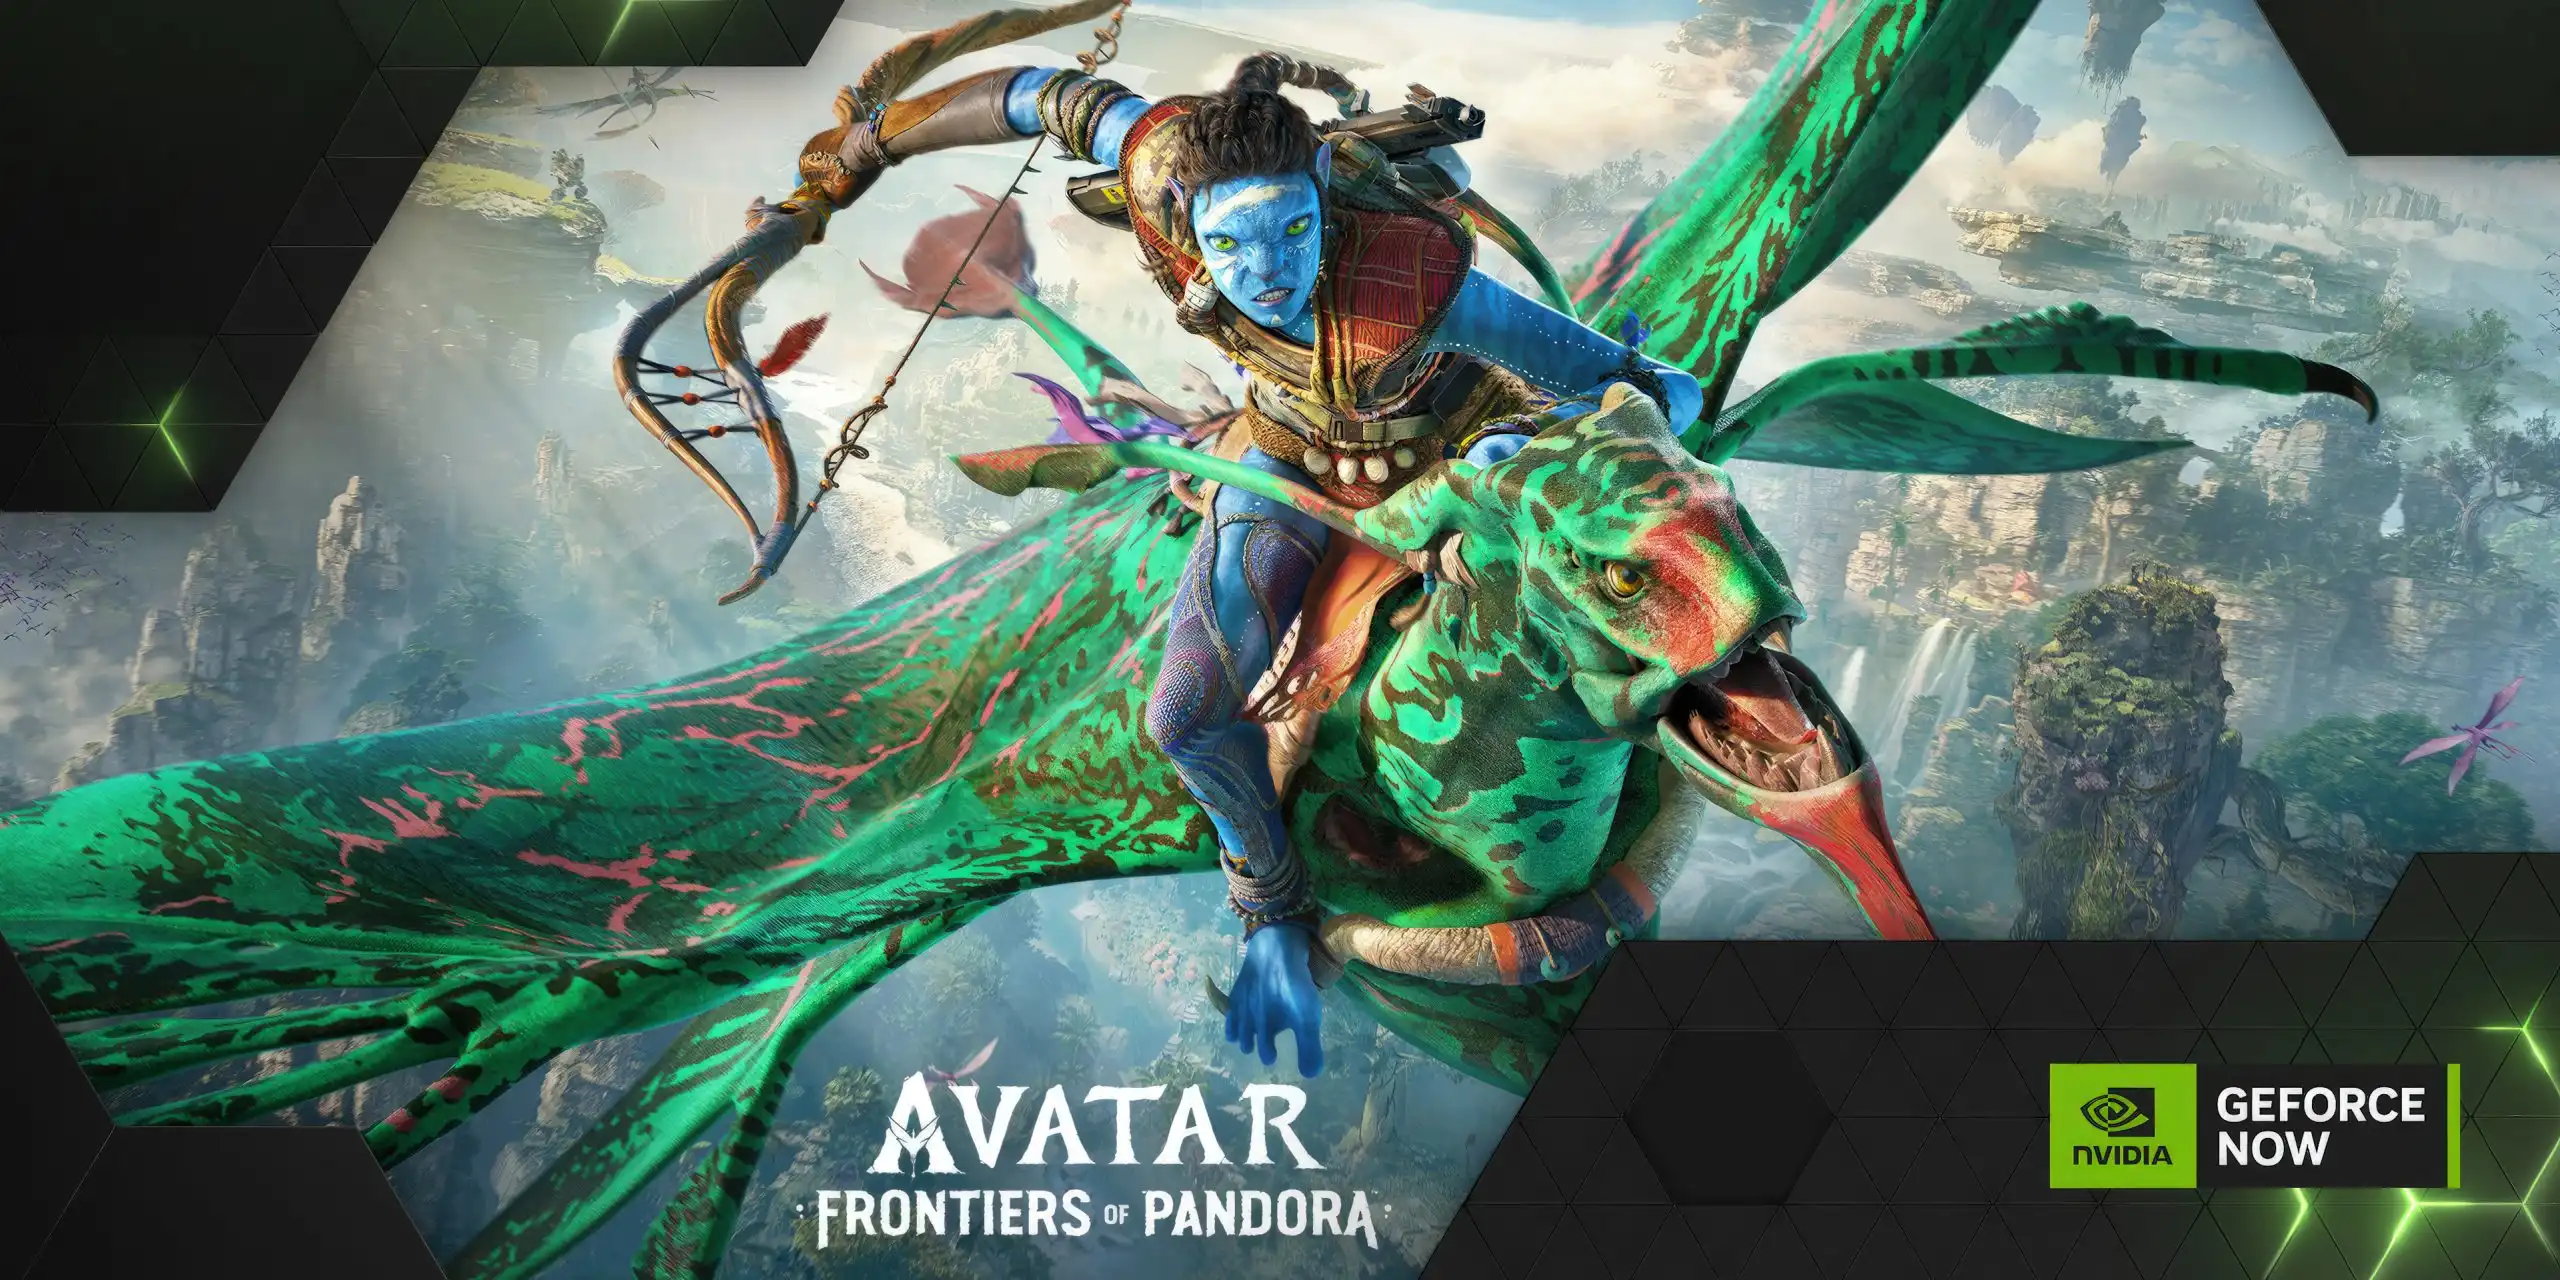 GeForce NOW agrega el jueves Avatar Frontiers of Pandora, The Day Before y Warhammer 40K Rogue Trader